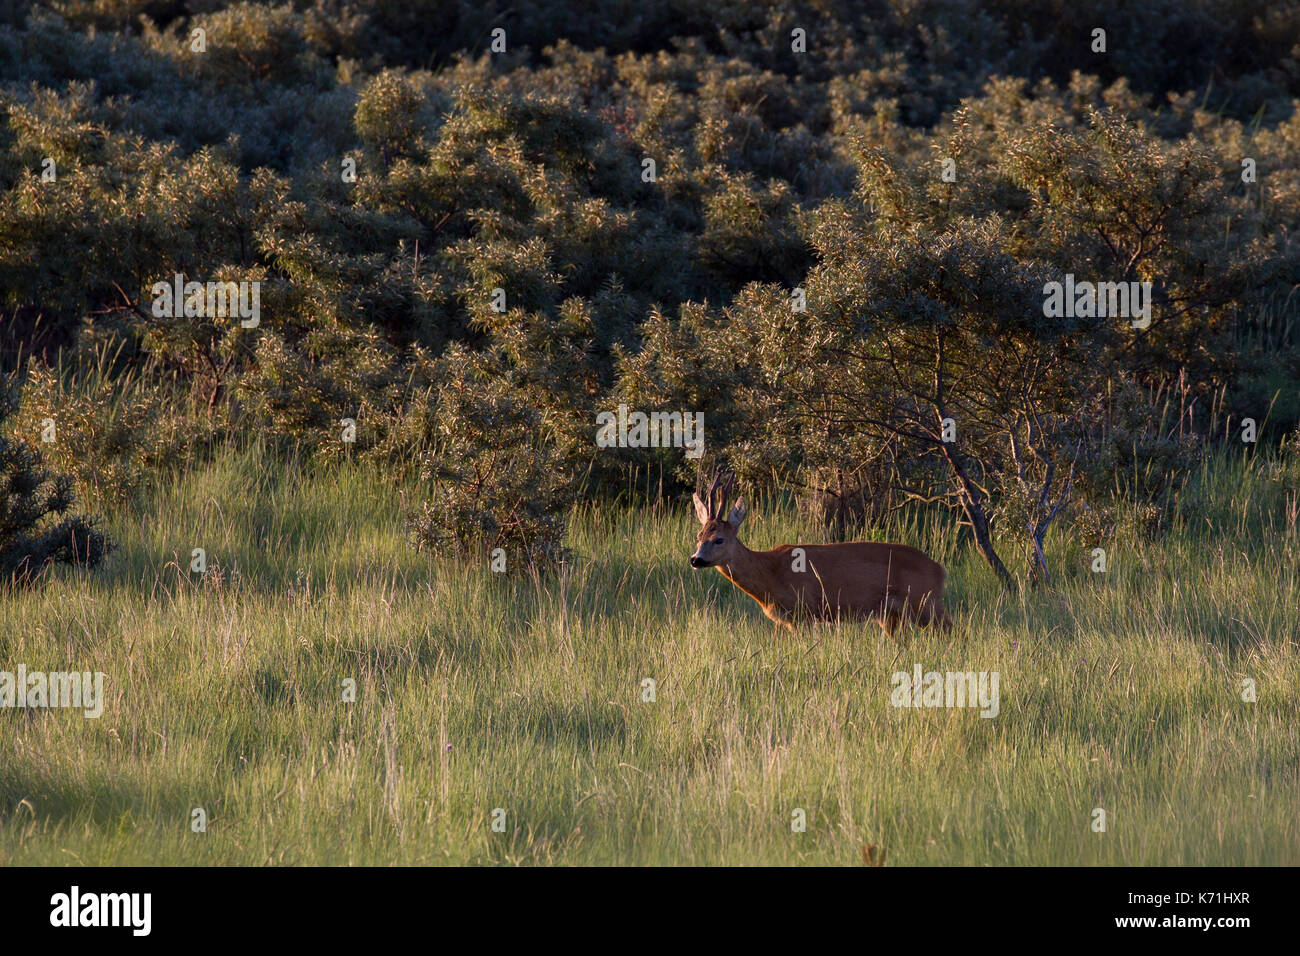 A European roe deer (Capreolus capreolus) on the north sea island Juist, East Frisia, Germany, Europe, in early morning light. Stock Photo